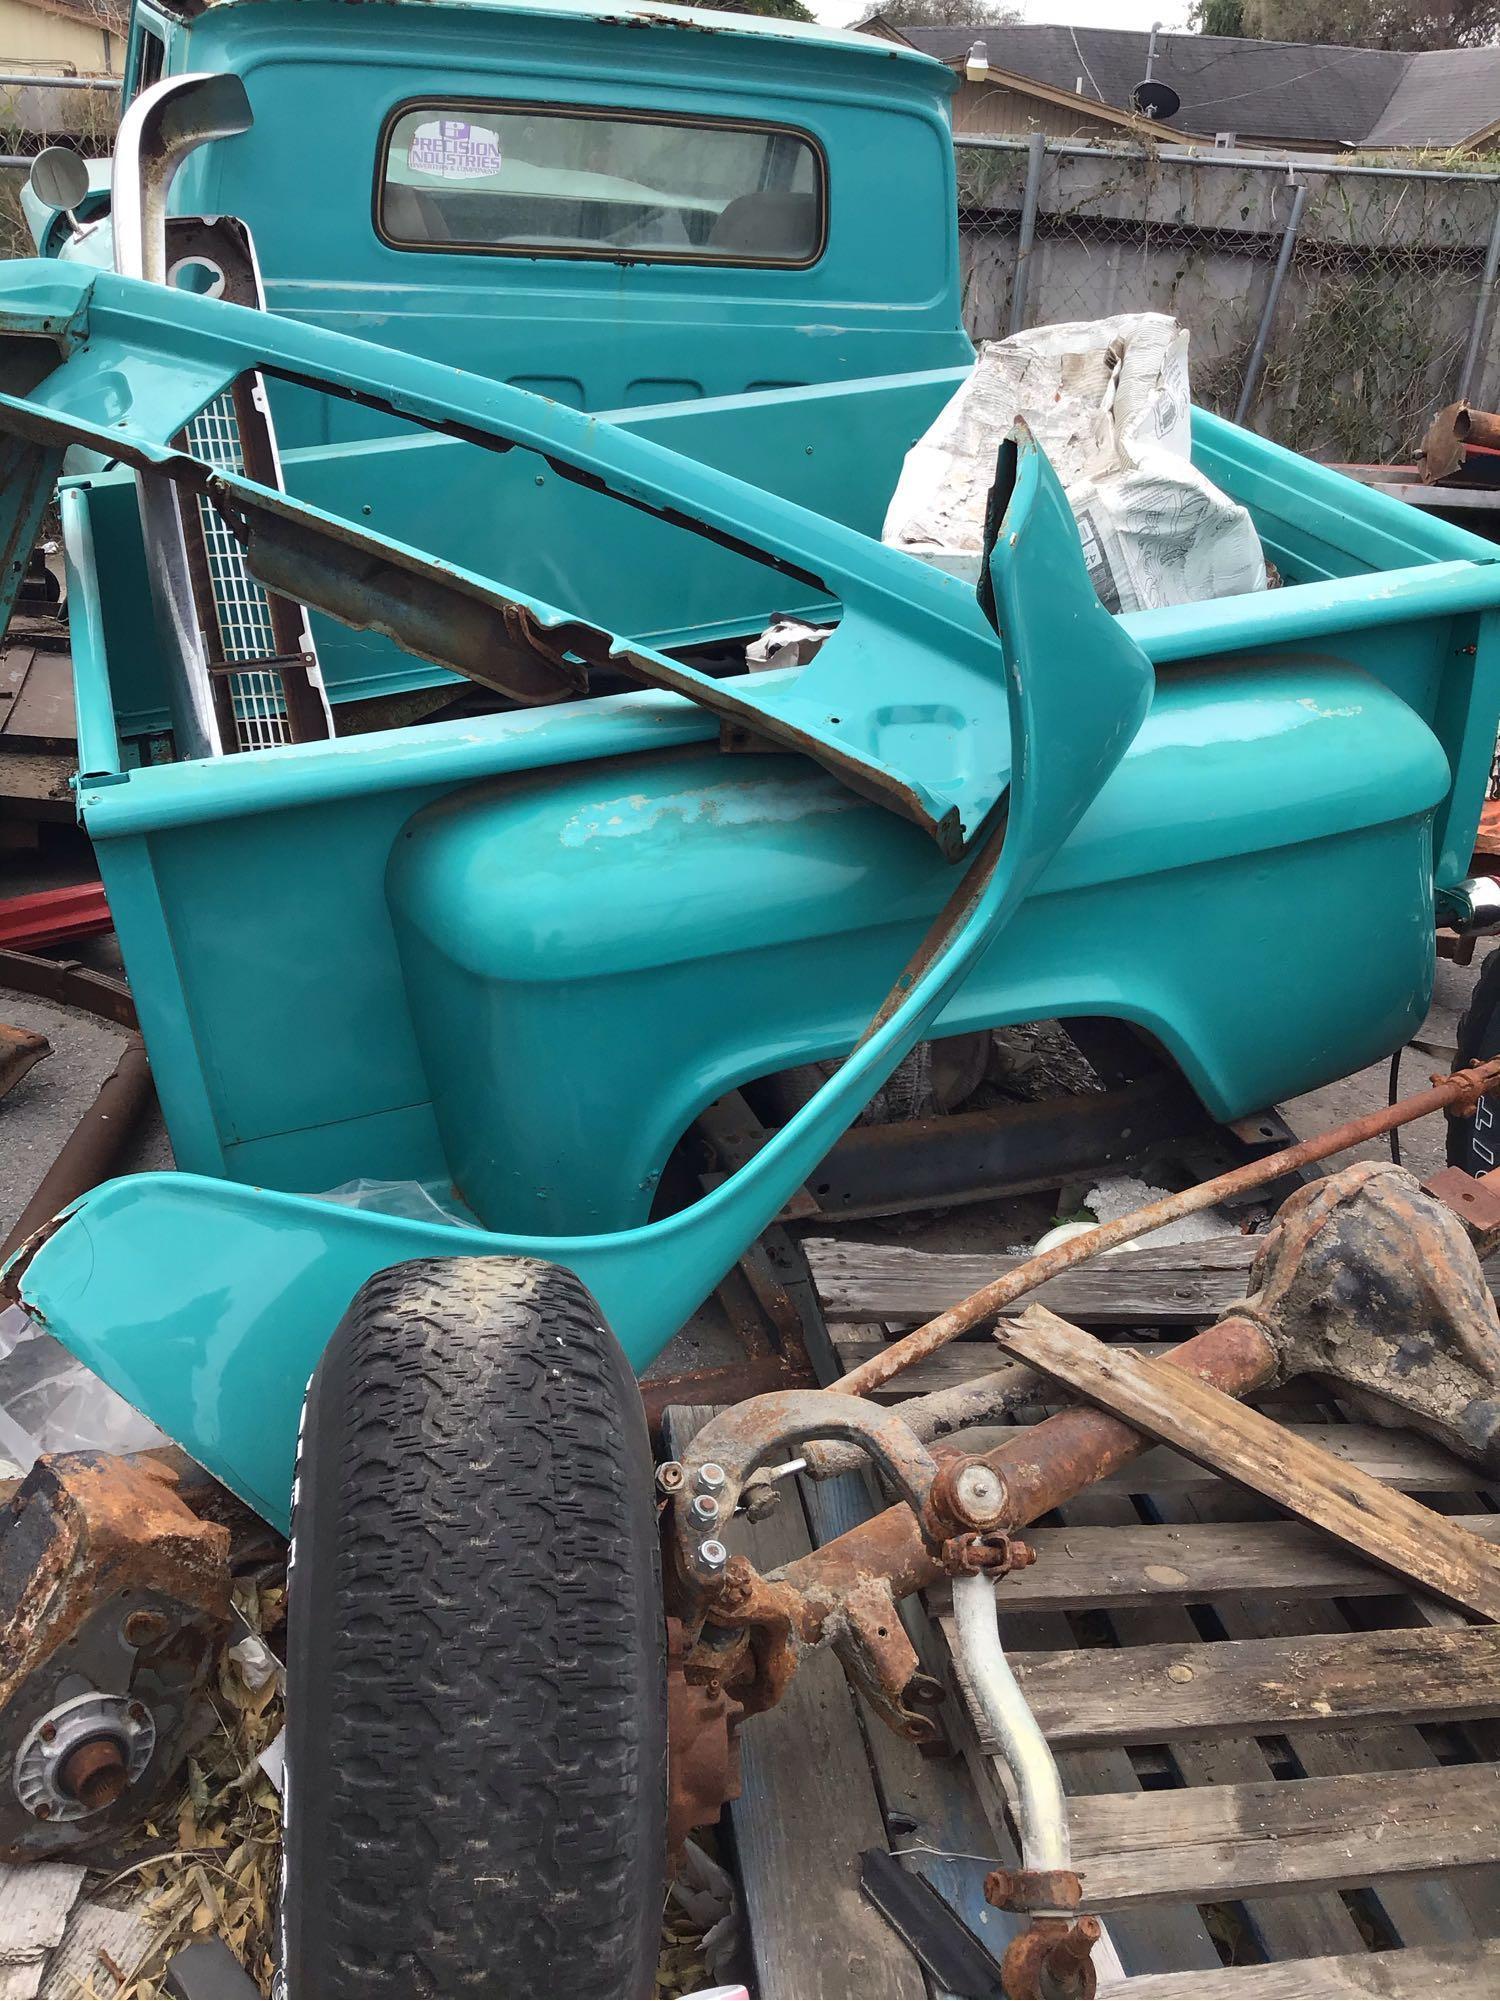 Parts of a 1956 Chev Truck on Pallets